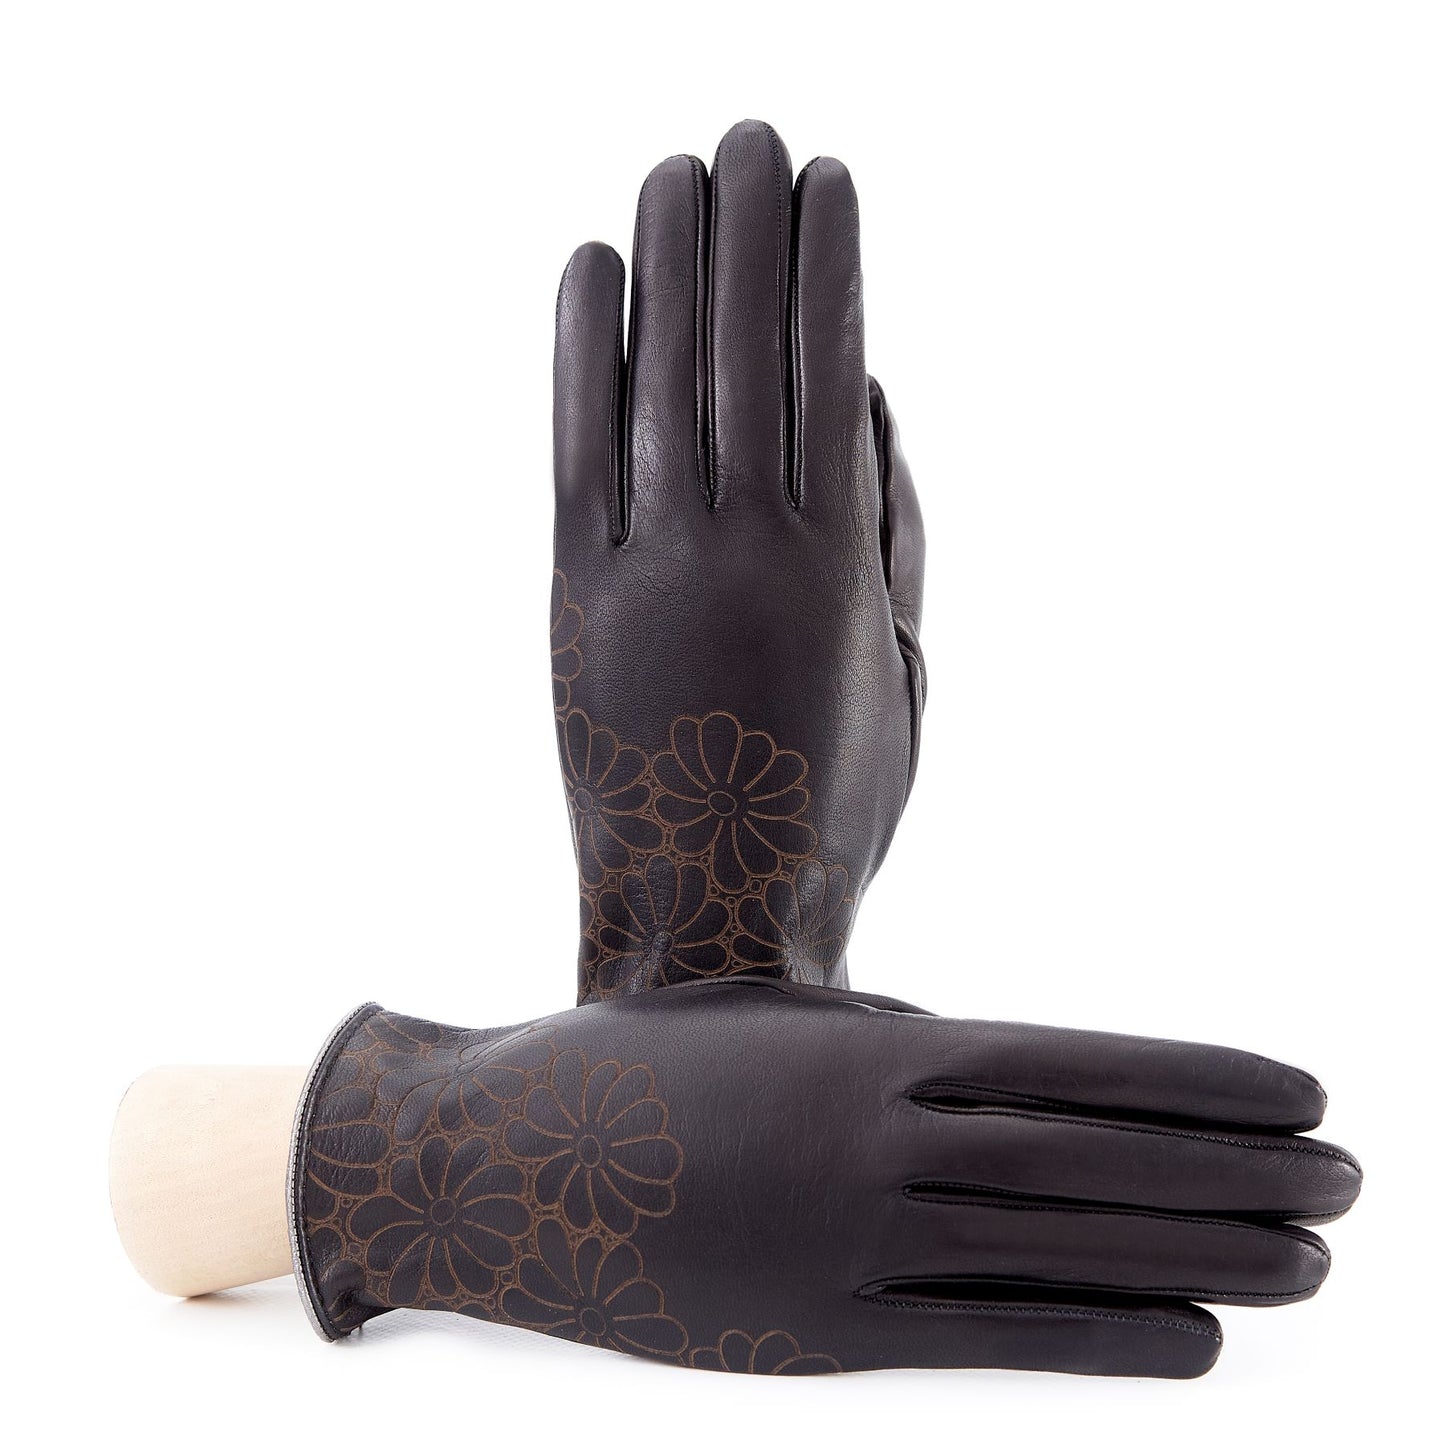 Women's unlined black nappa leather gloves with floral detail